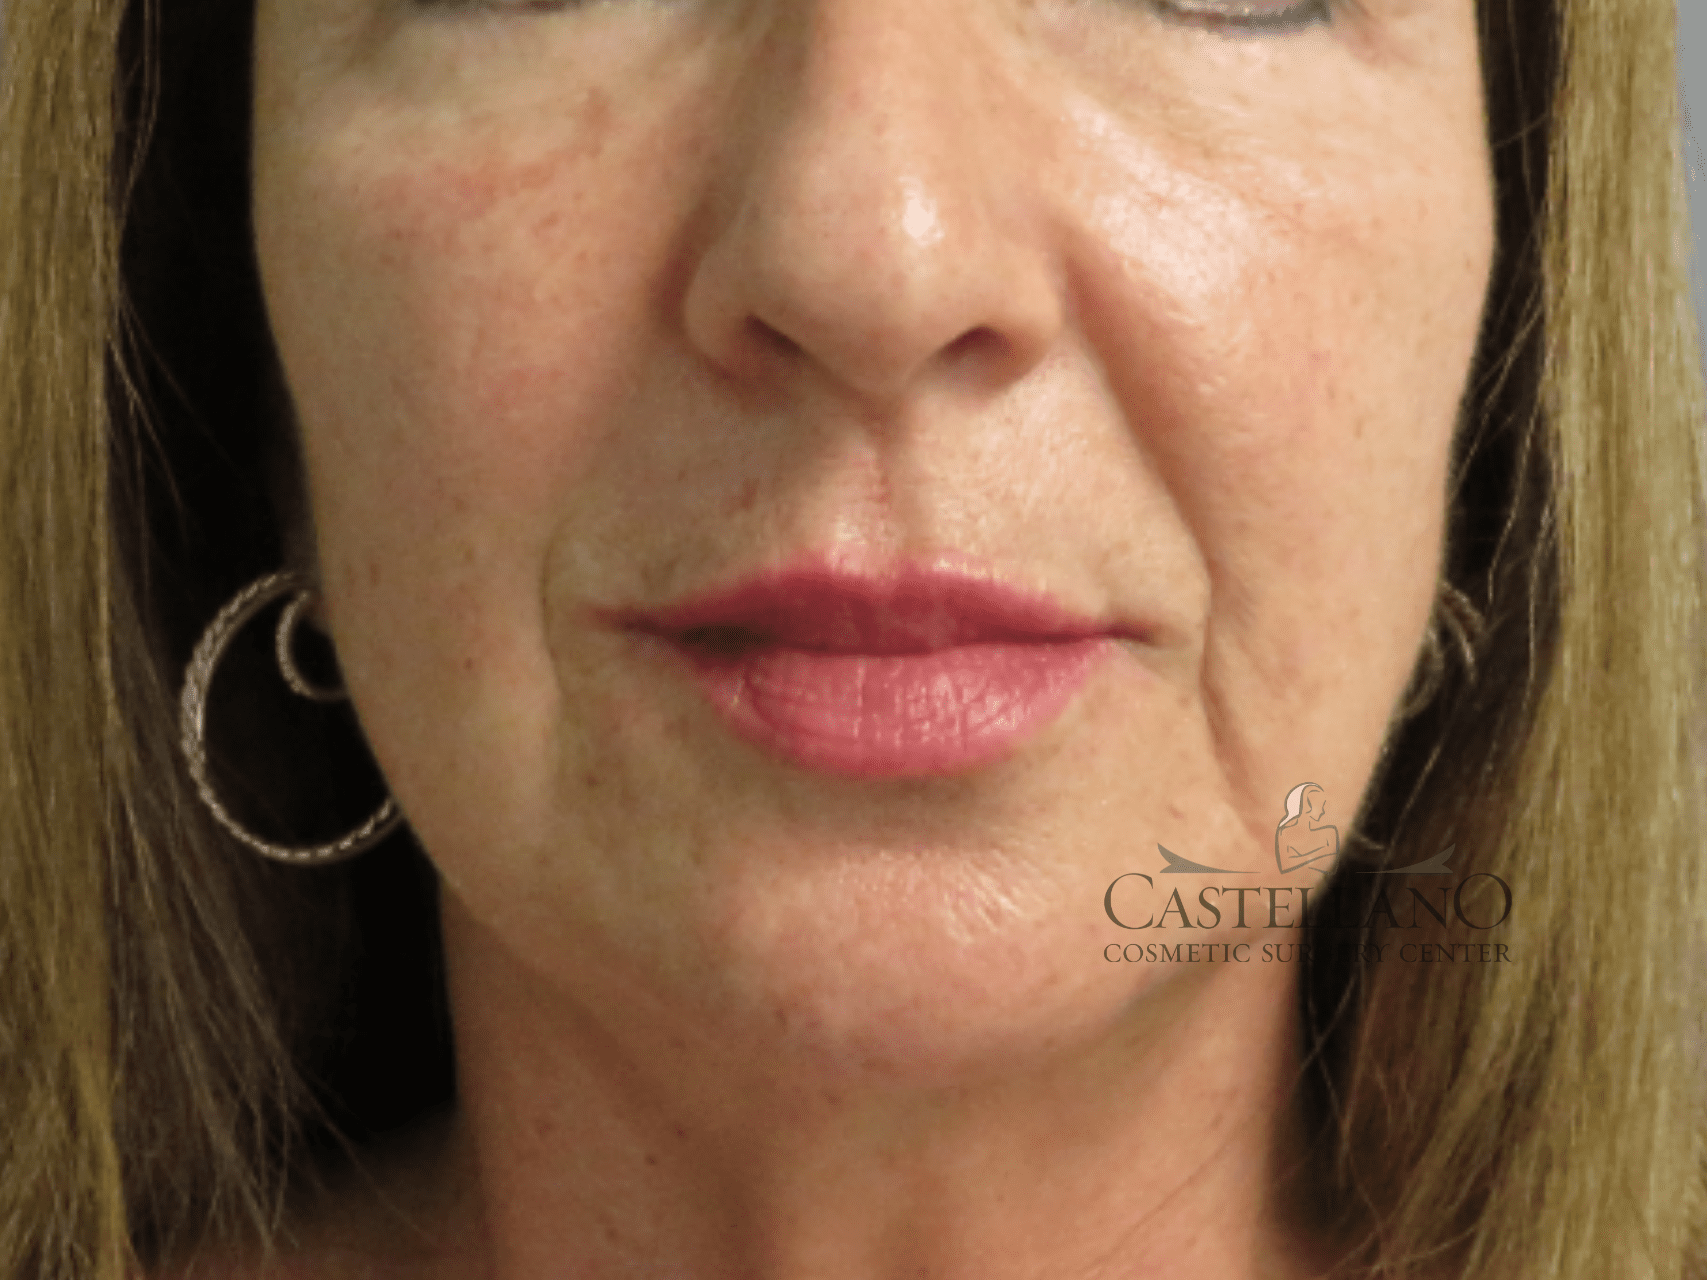 Injectable Fillers Patient Photo - Case 16321 - after view